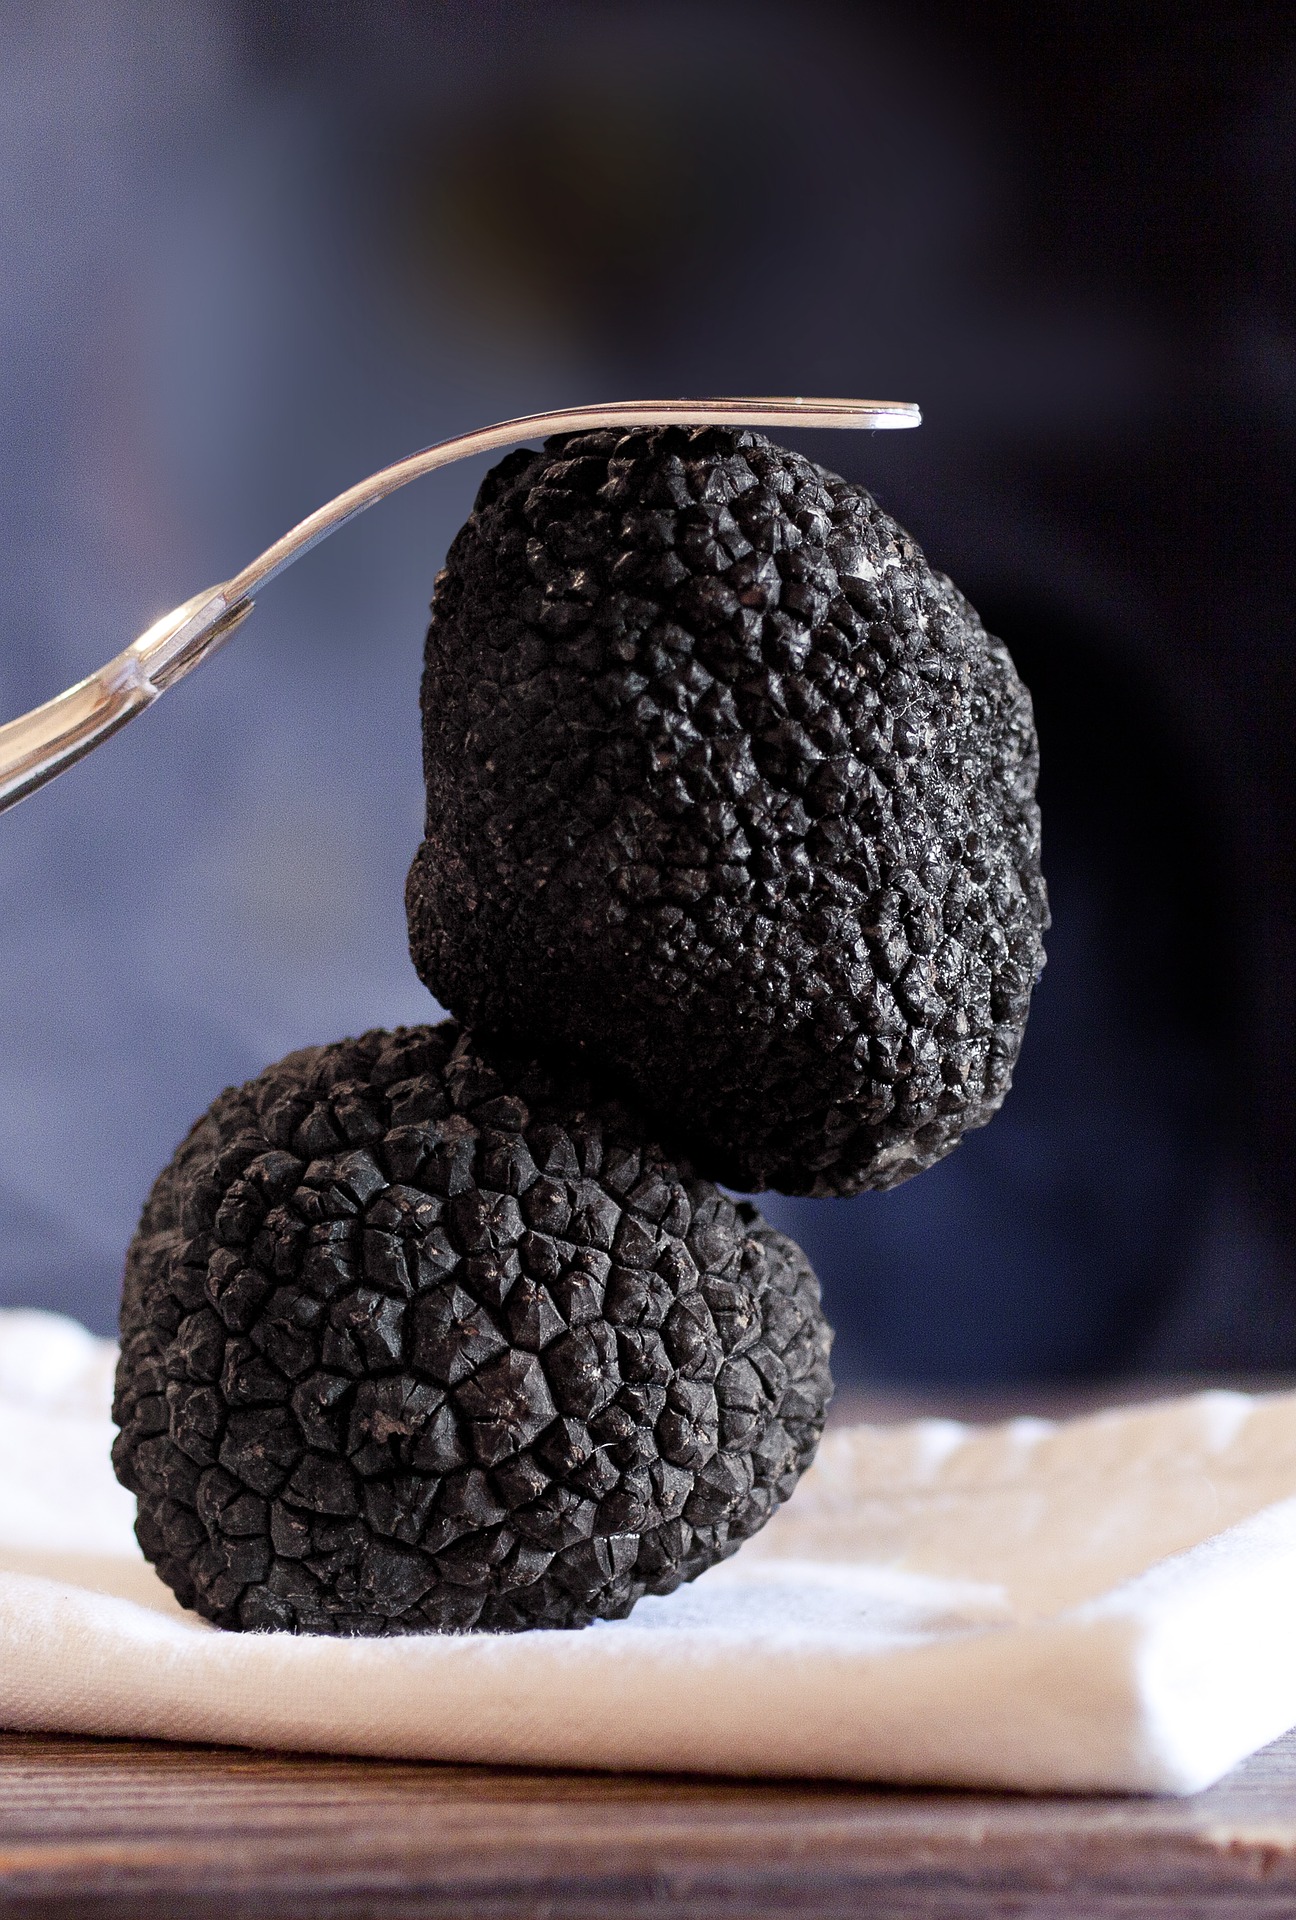 Black truffles are expensive but worth every bite!